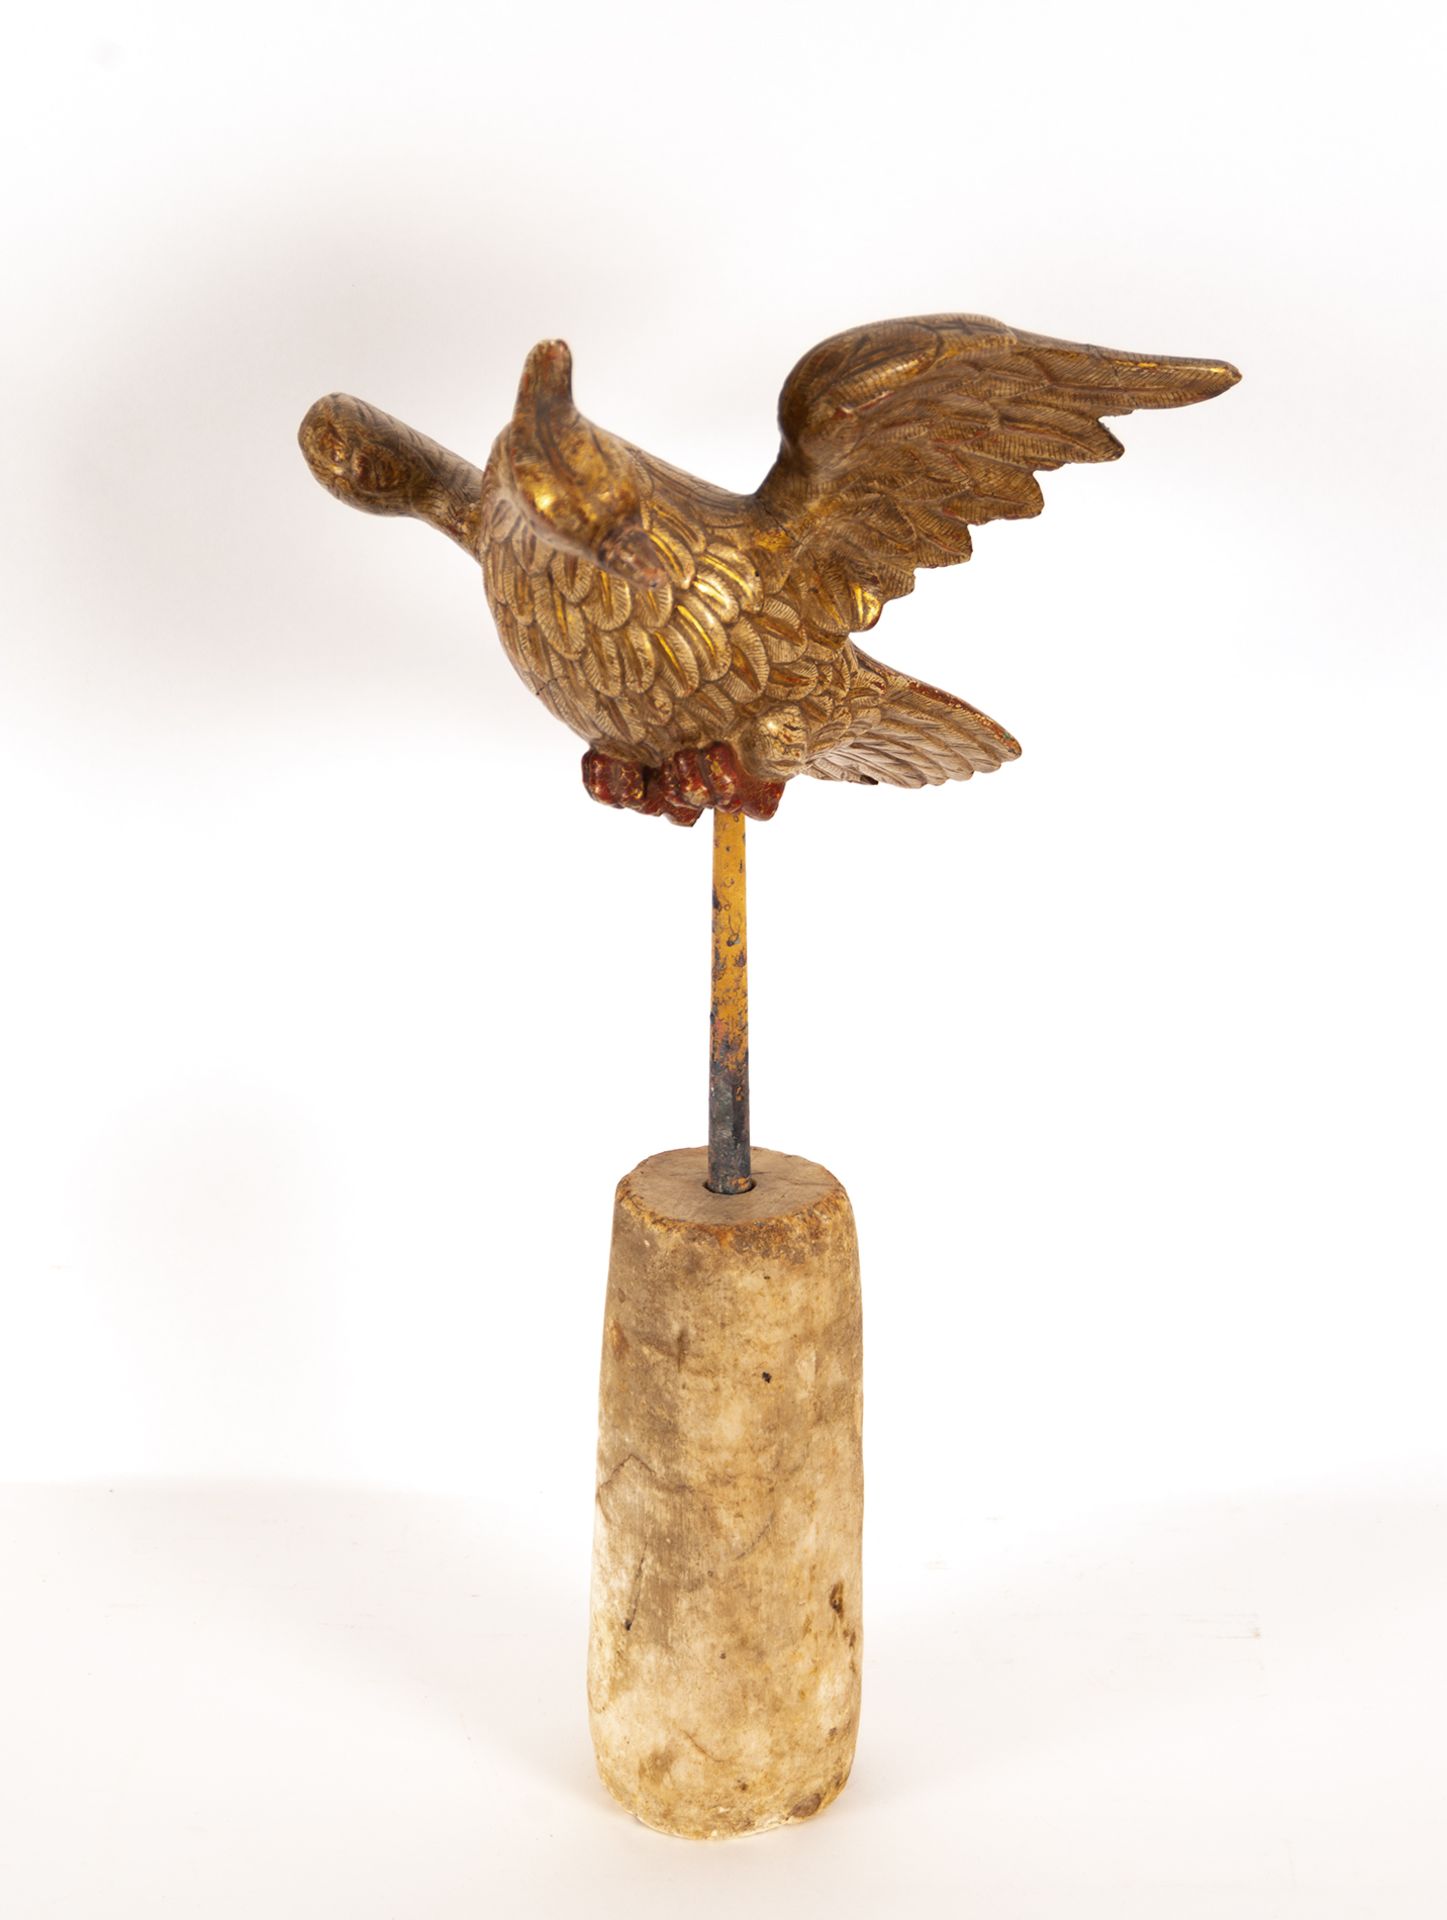 Dove representing the Holy Spirit in gilded wood, possibly Mexican colonial school, 17th century